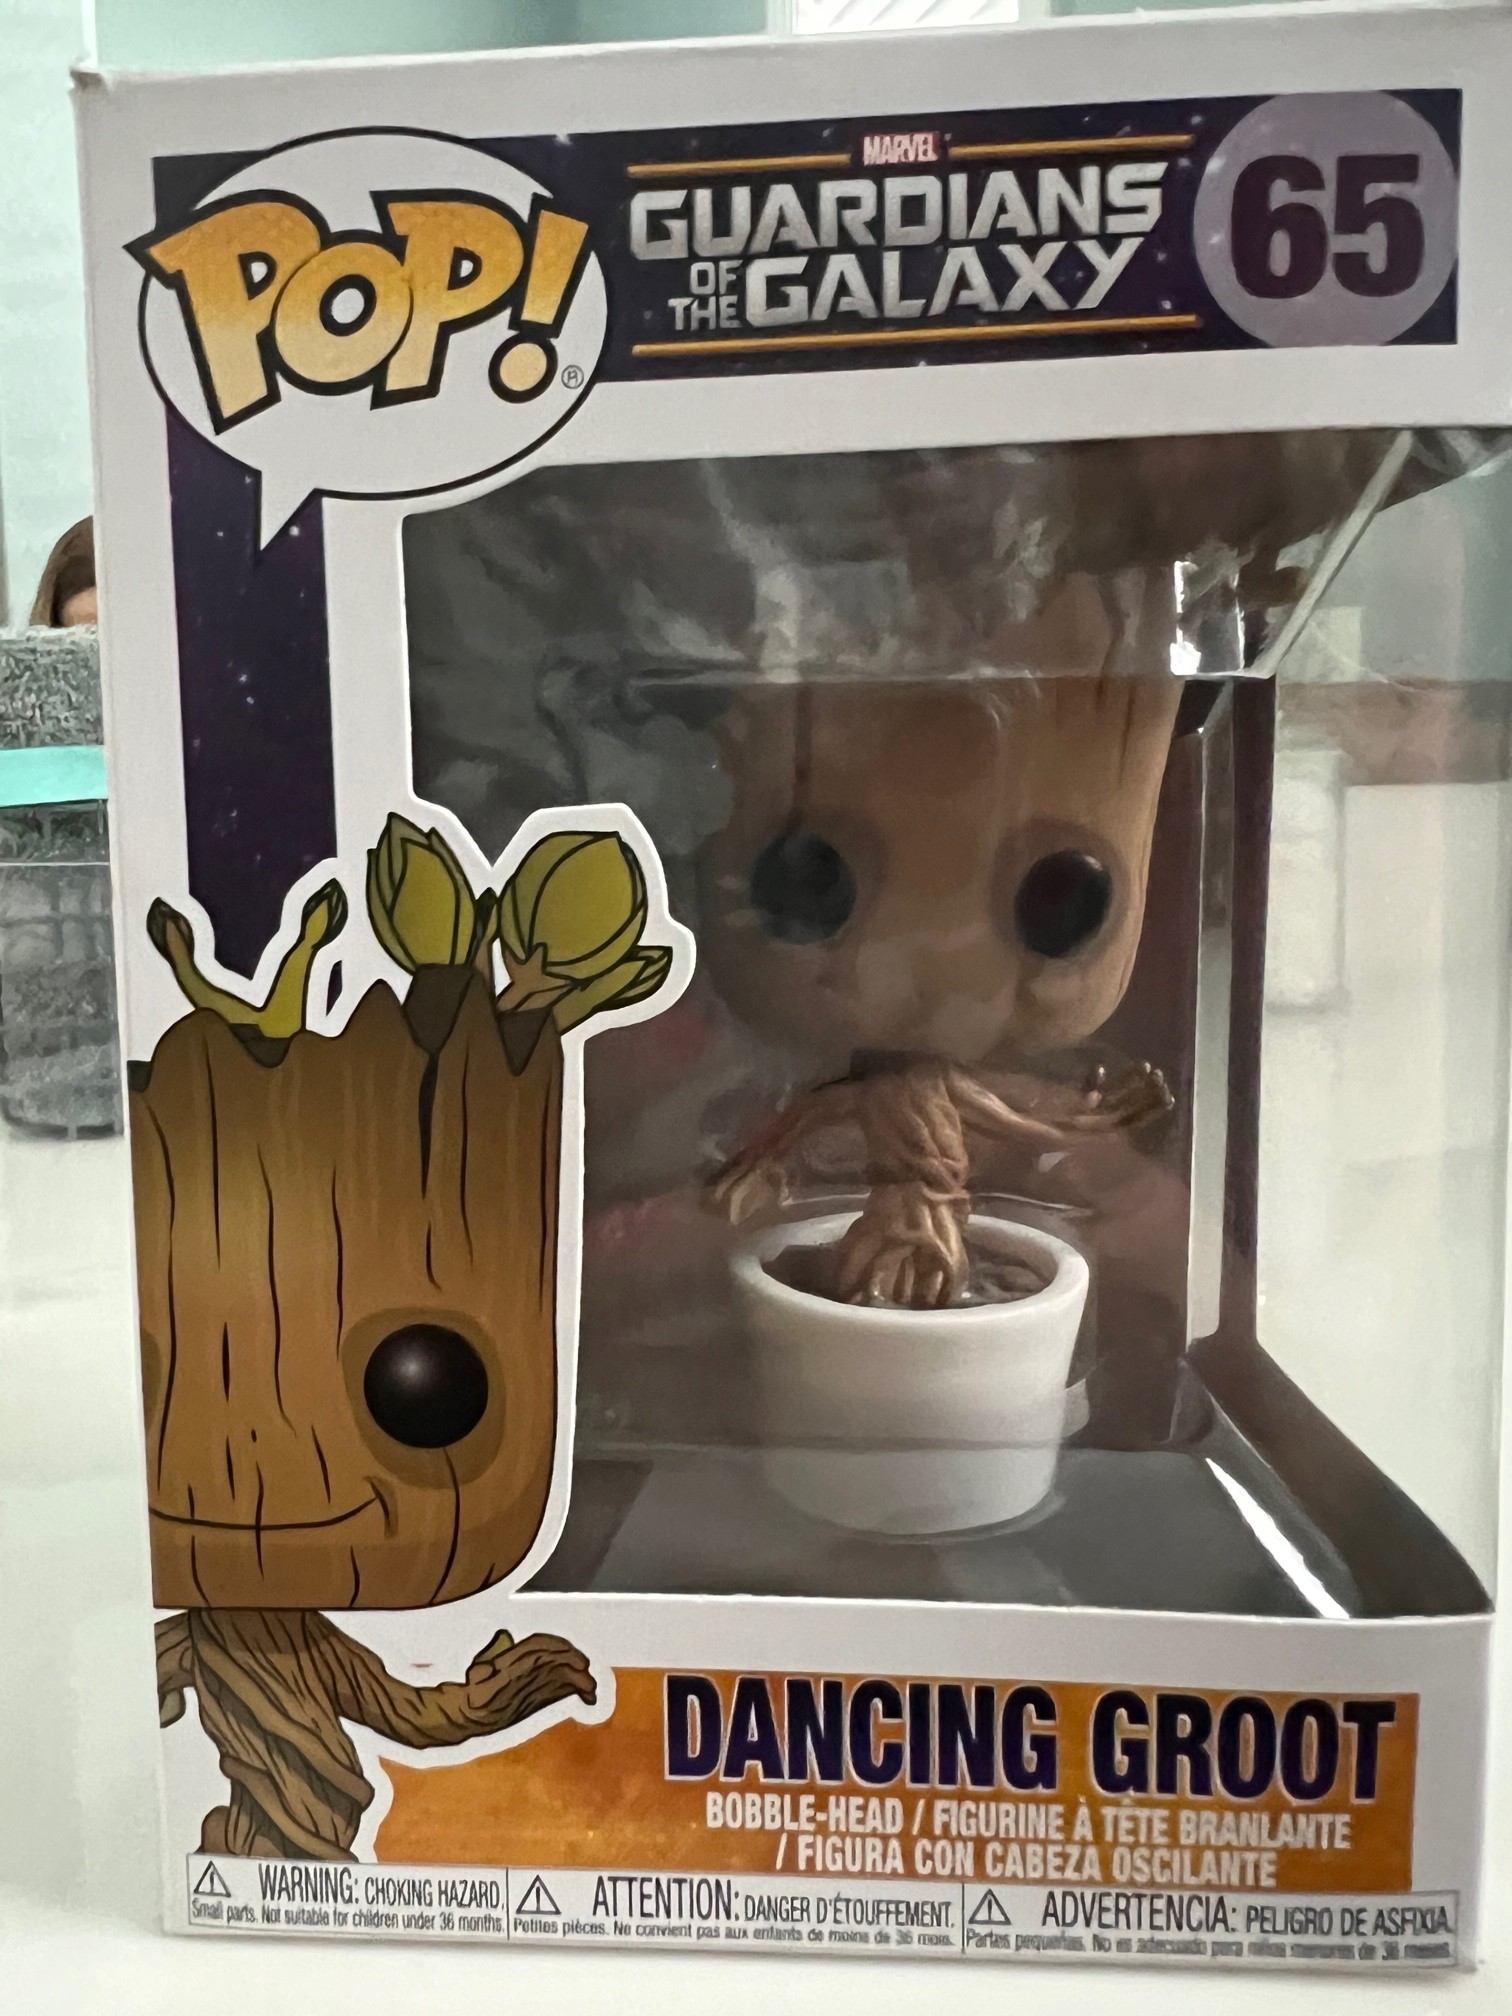 Brown Rectangular Groot Planter Guardians Of The Galaxy Baby Groot